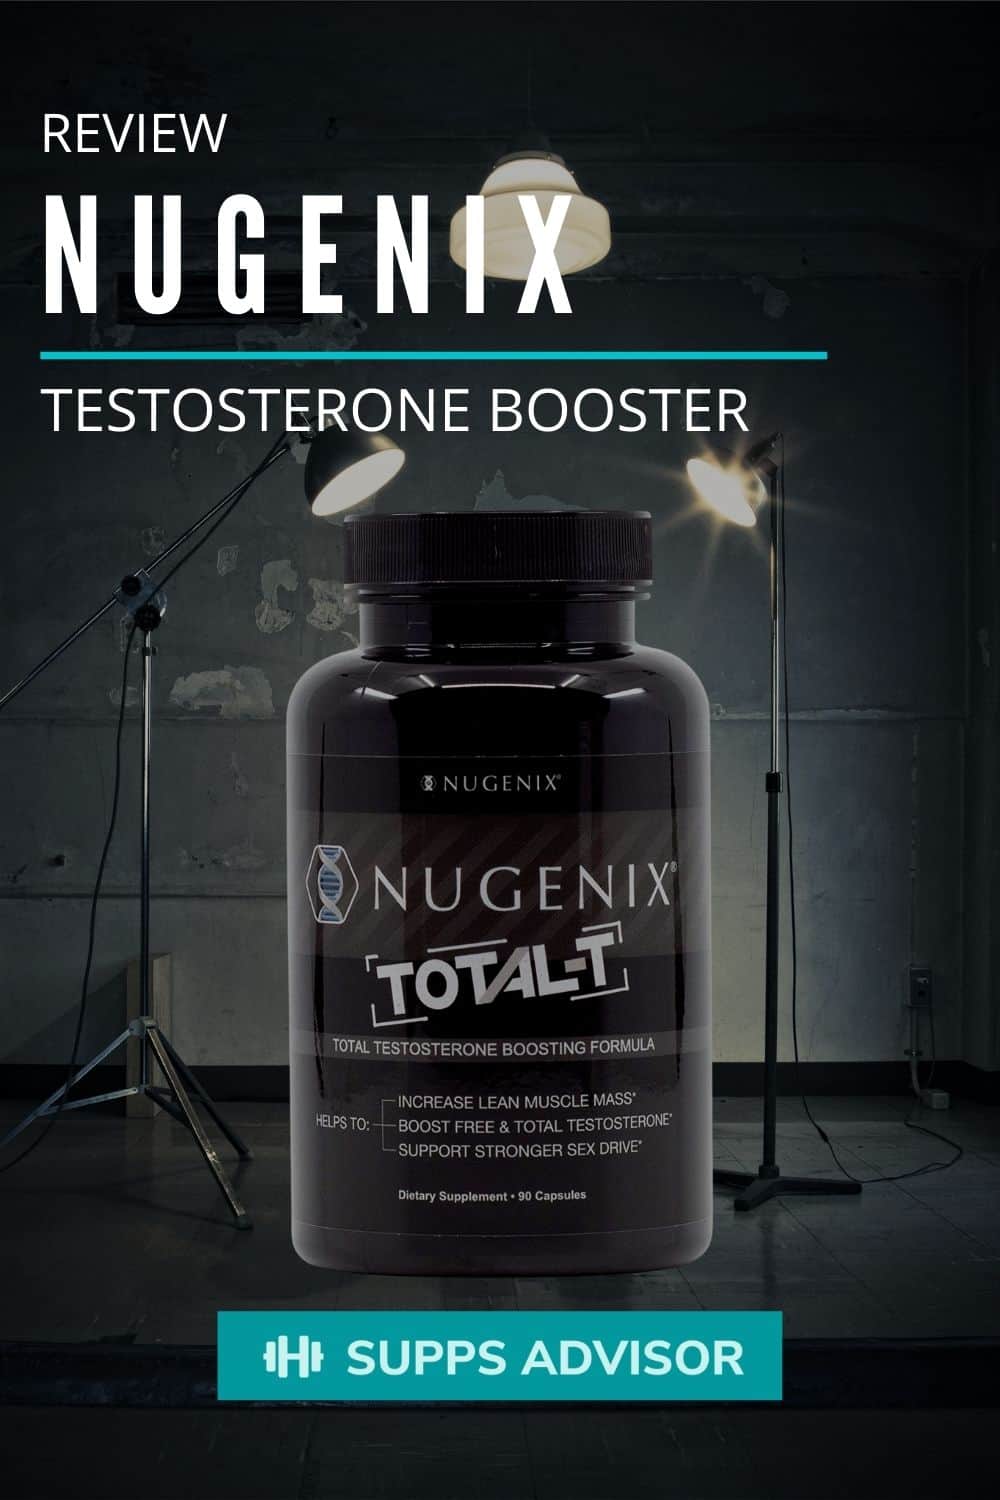 Nugenix Total T Reviews 2022 Fact Features And Benefits 2956